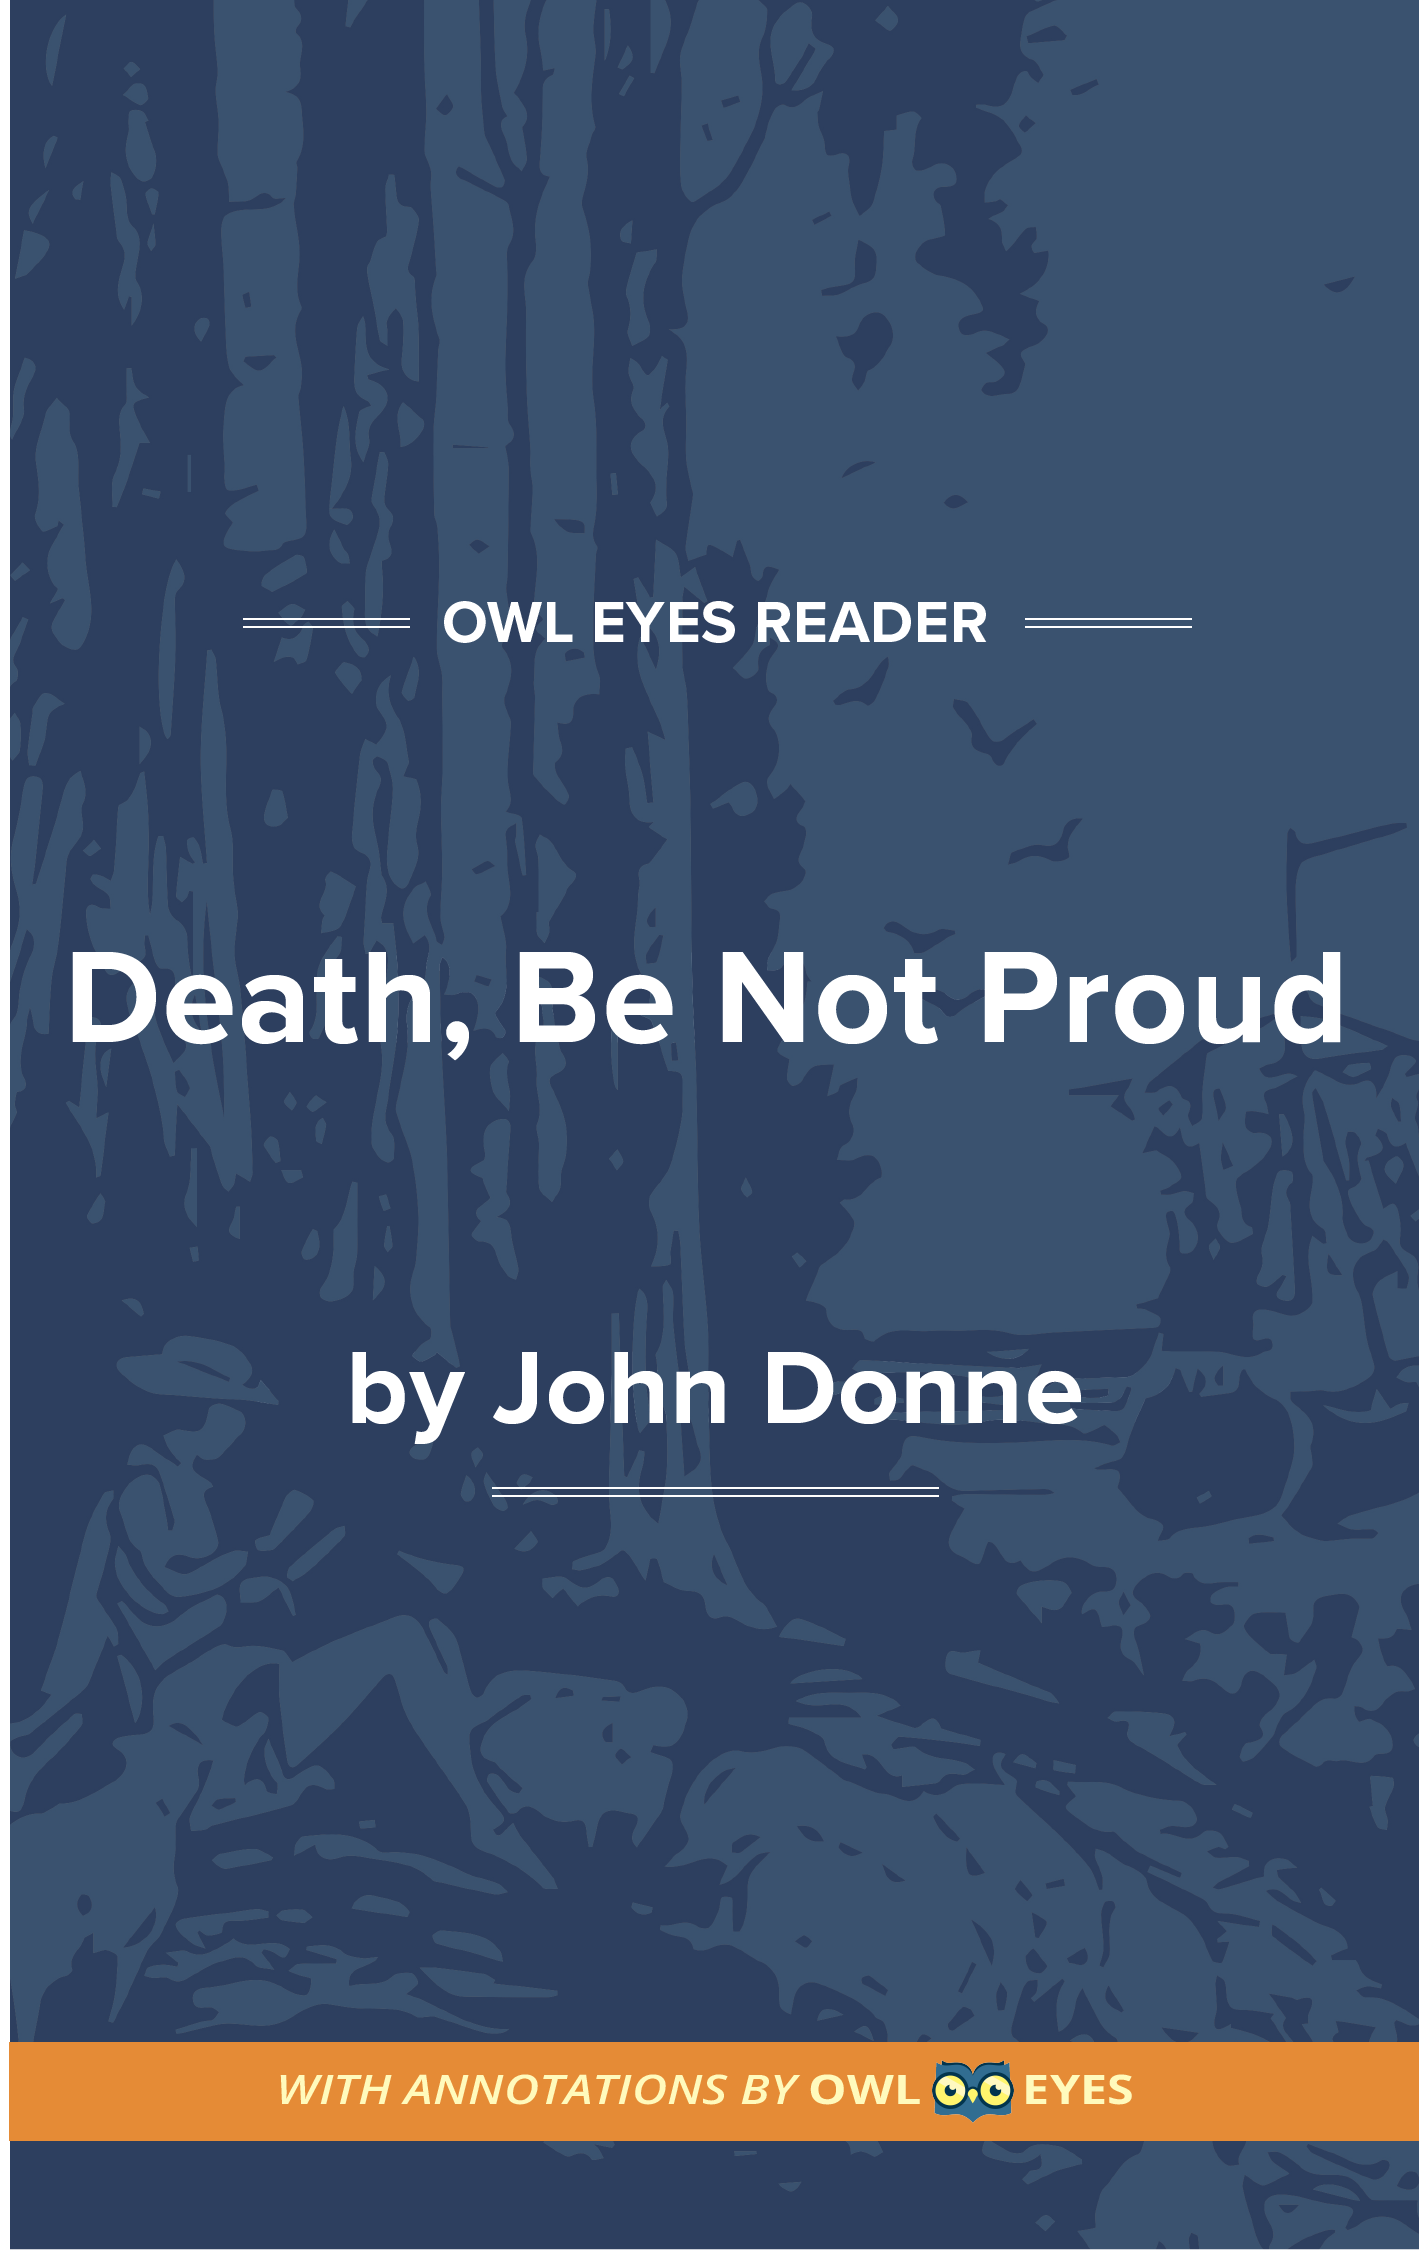 Death Be Not Proud Full Text Of The Poem Owl Eyes What I Message By John Donne 